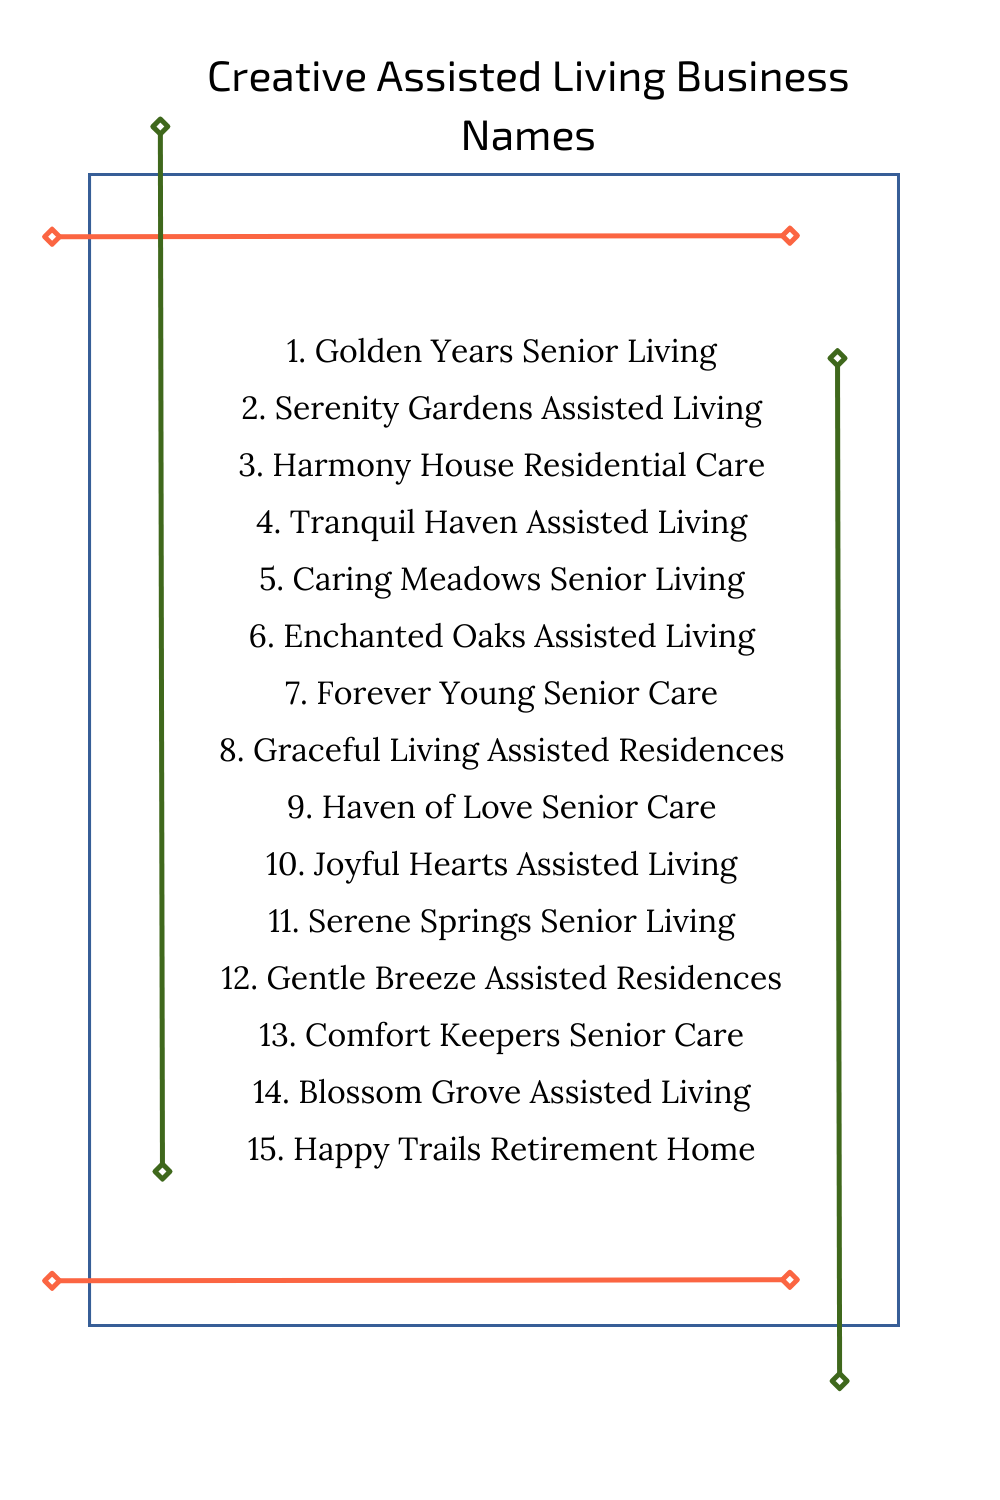 Creative Assisted Living Business Names